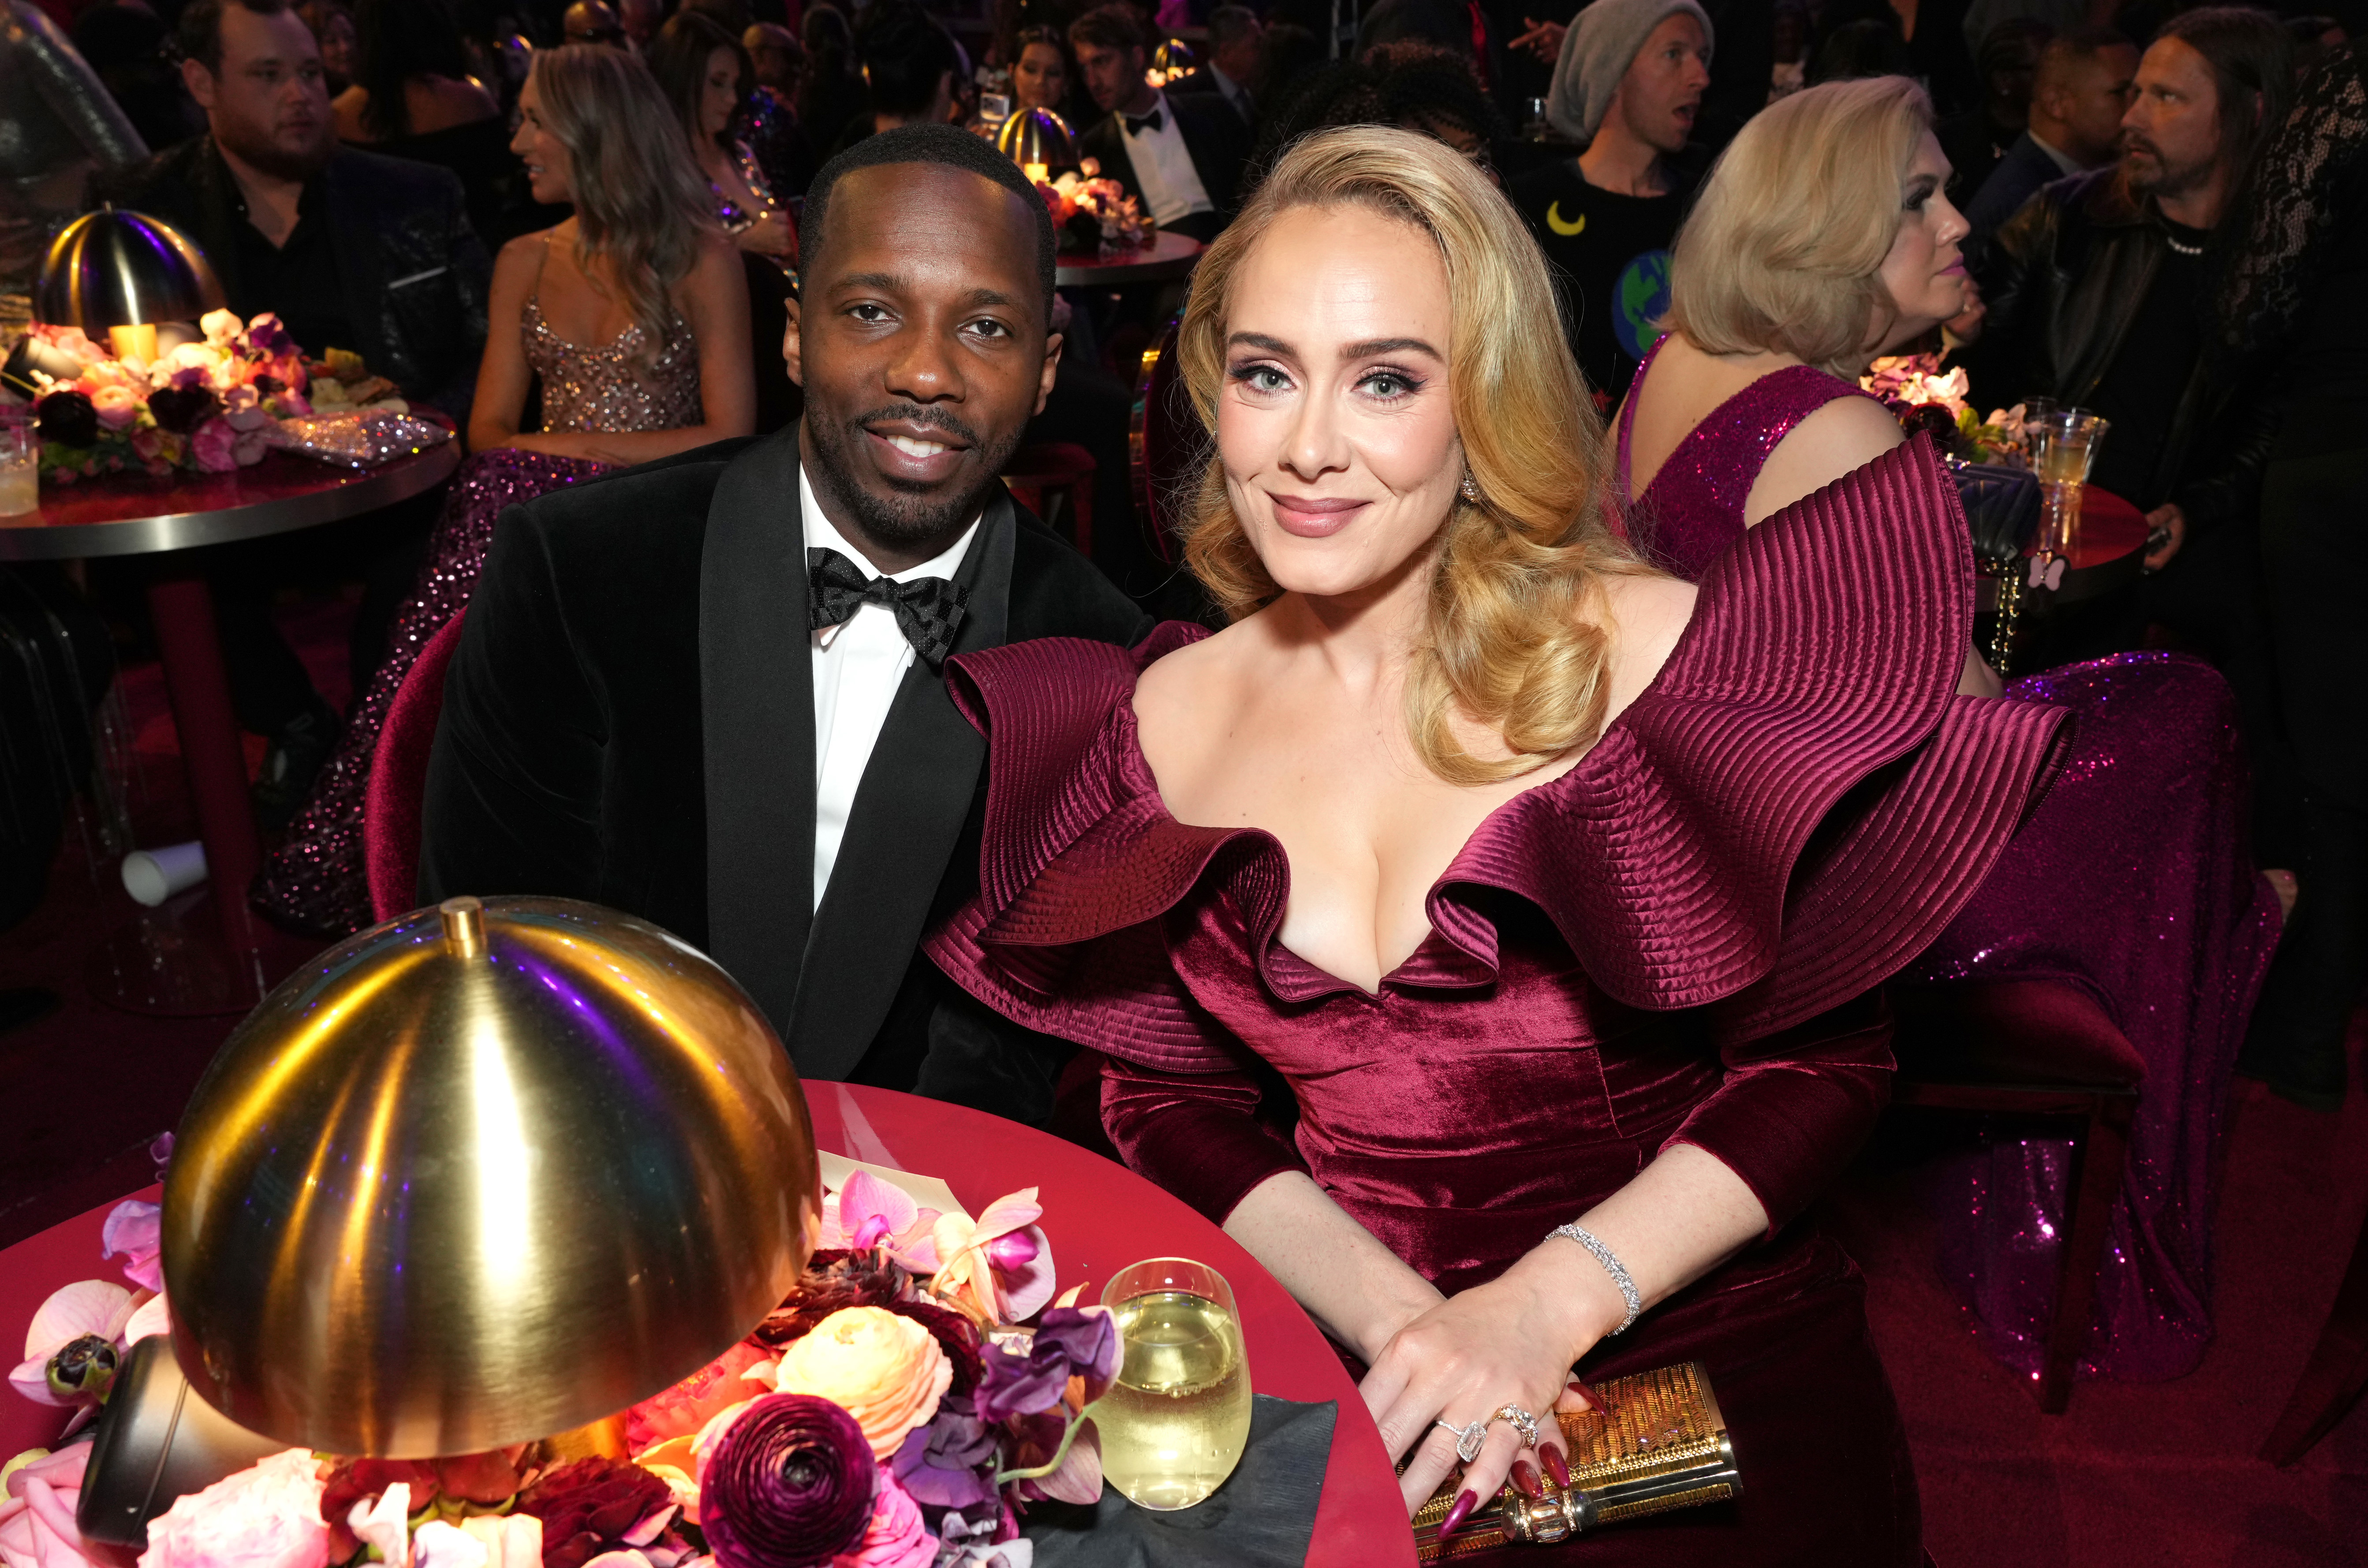 Rich Paul and Adele at the 2023 Grammy Awards